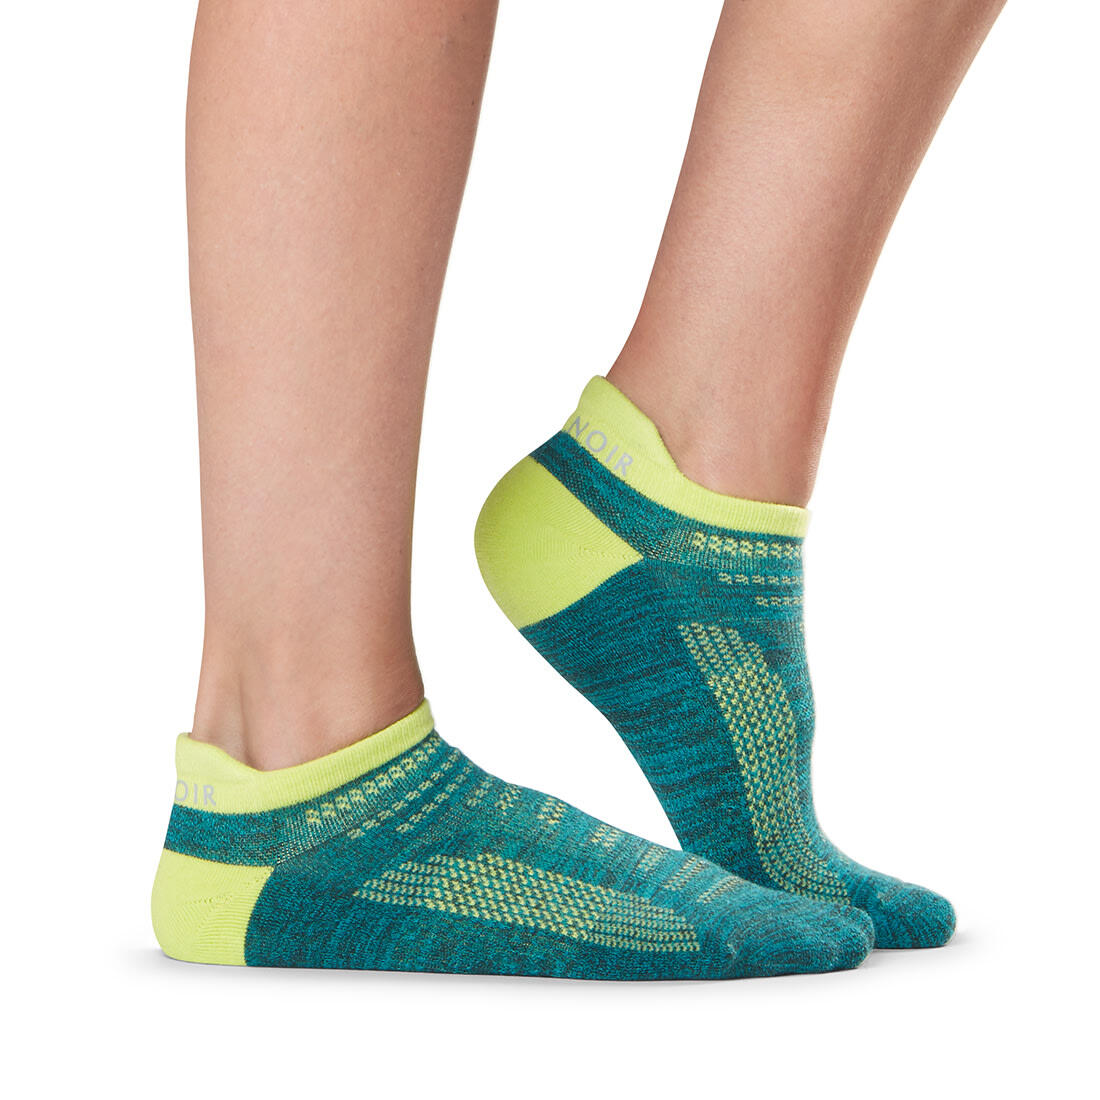 FITNESS-MAD Womens/Ladies Two Tone Sports Socks (Teal/Lime Green)